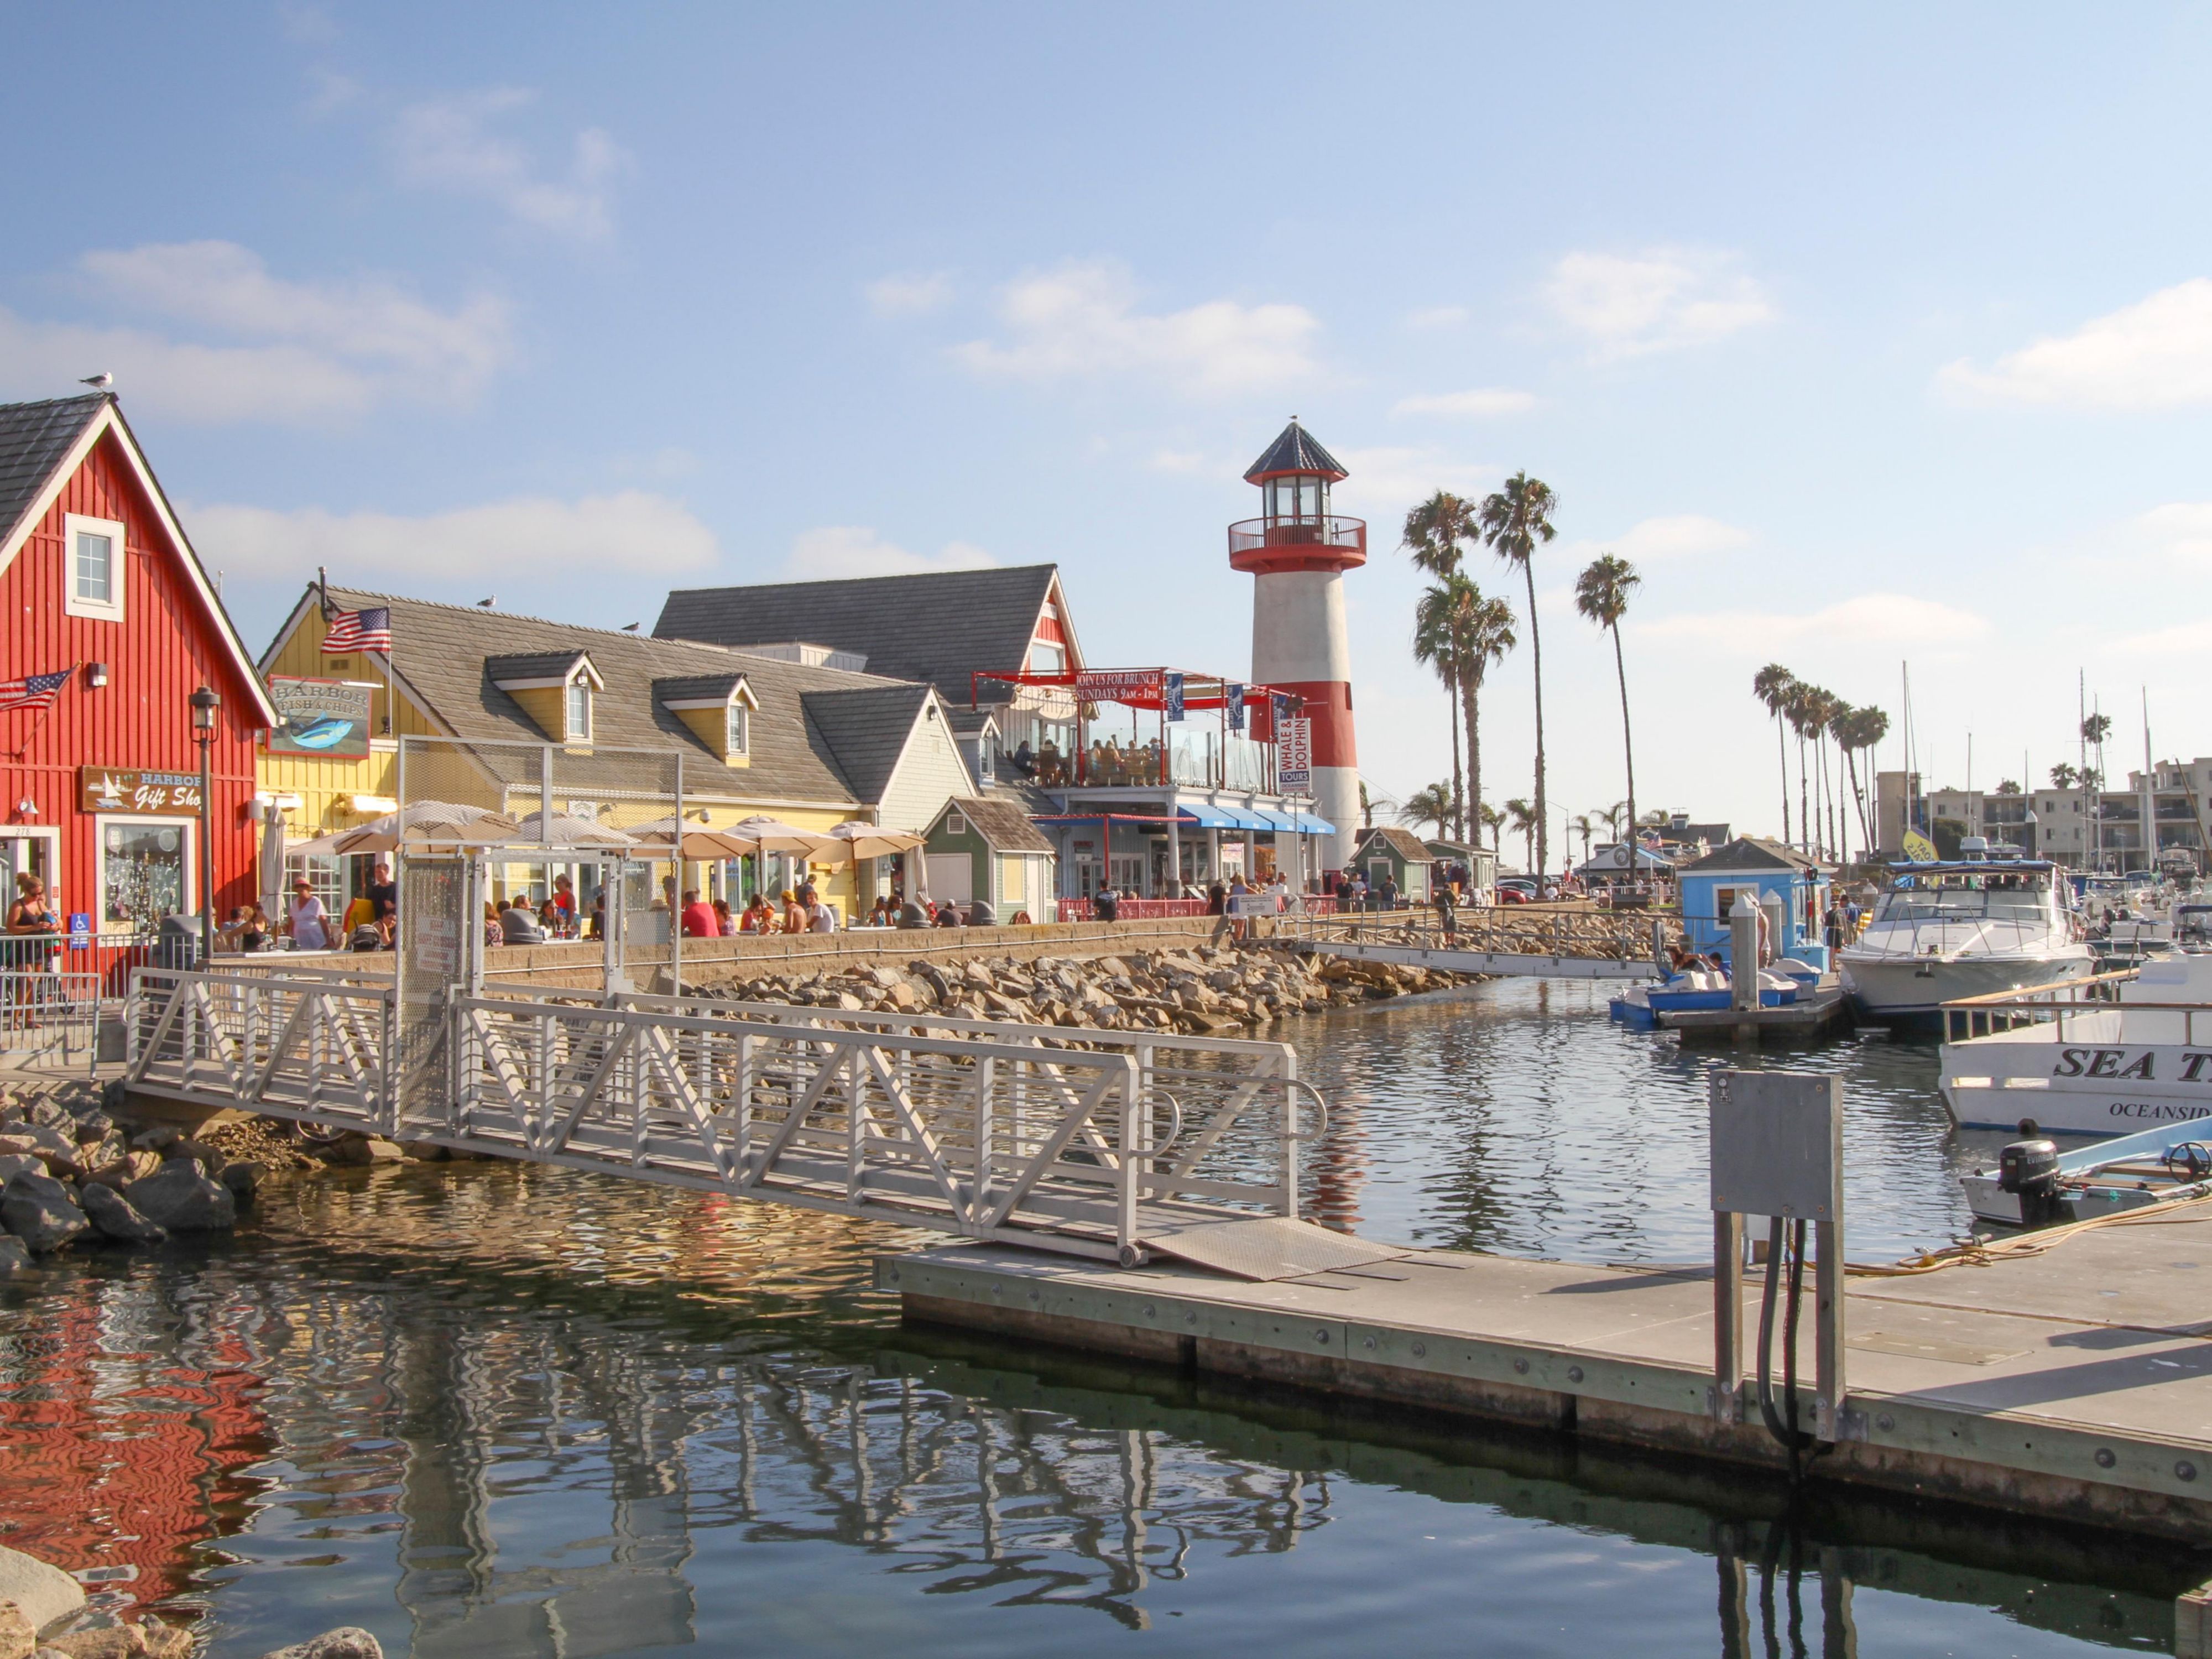 Only a 5-minute walk from the hotel lobby, the Oceanside Harbor Village offers a variety of dining options, local shops, as well as variety of activities including whale watching, boat rentals, stand-up paddleboarding, and more.